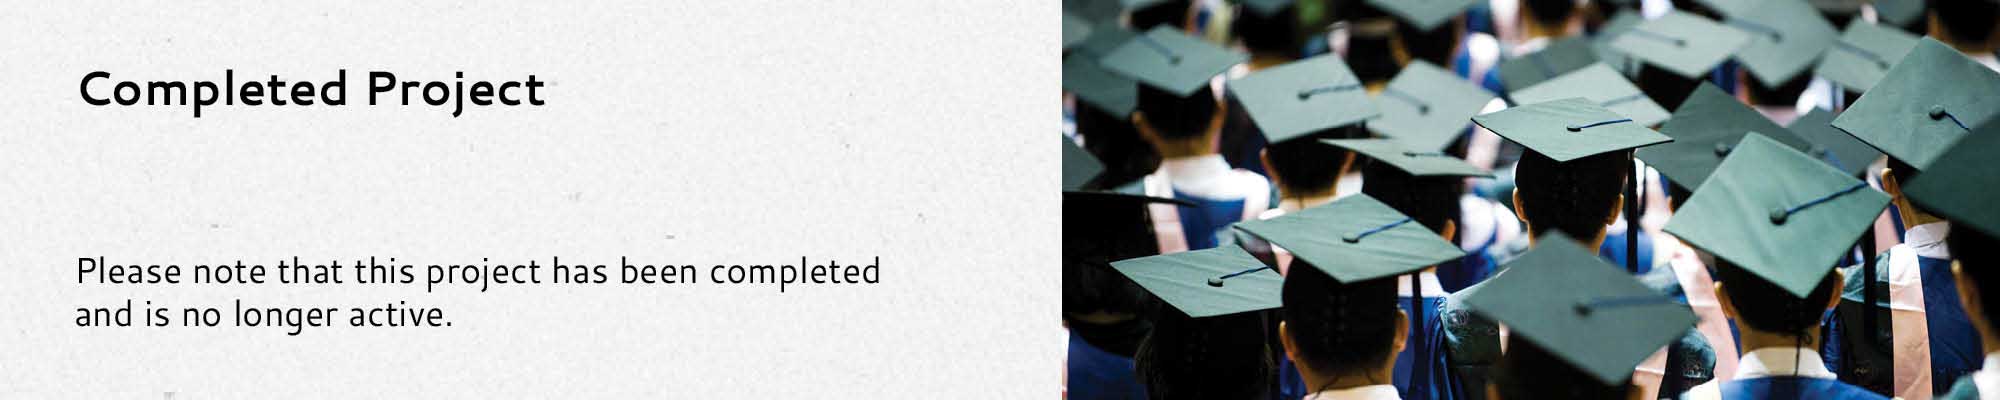 Applied Baccalaureate Degrees header image